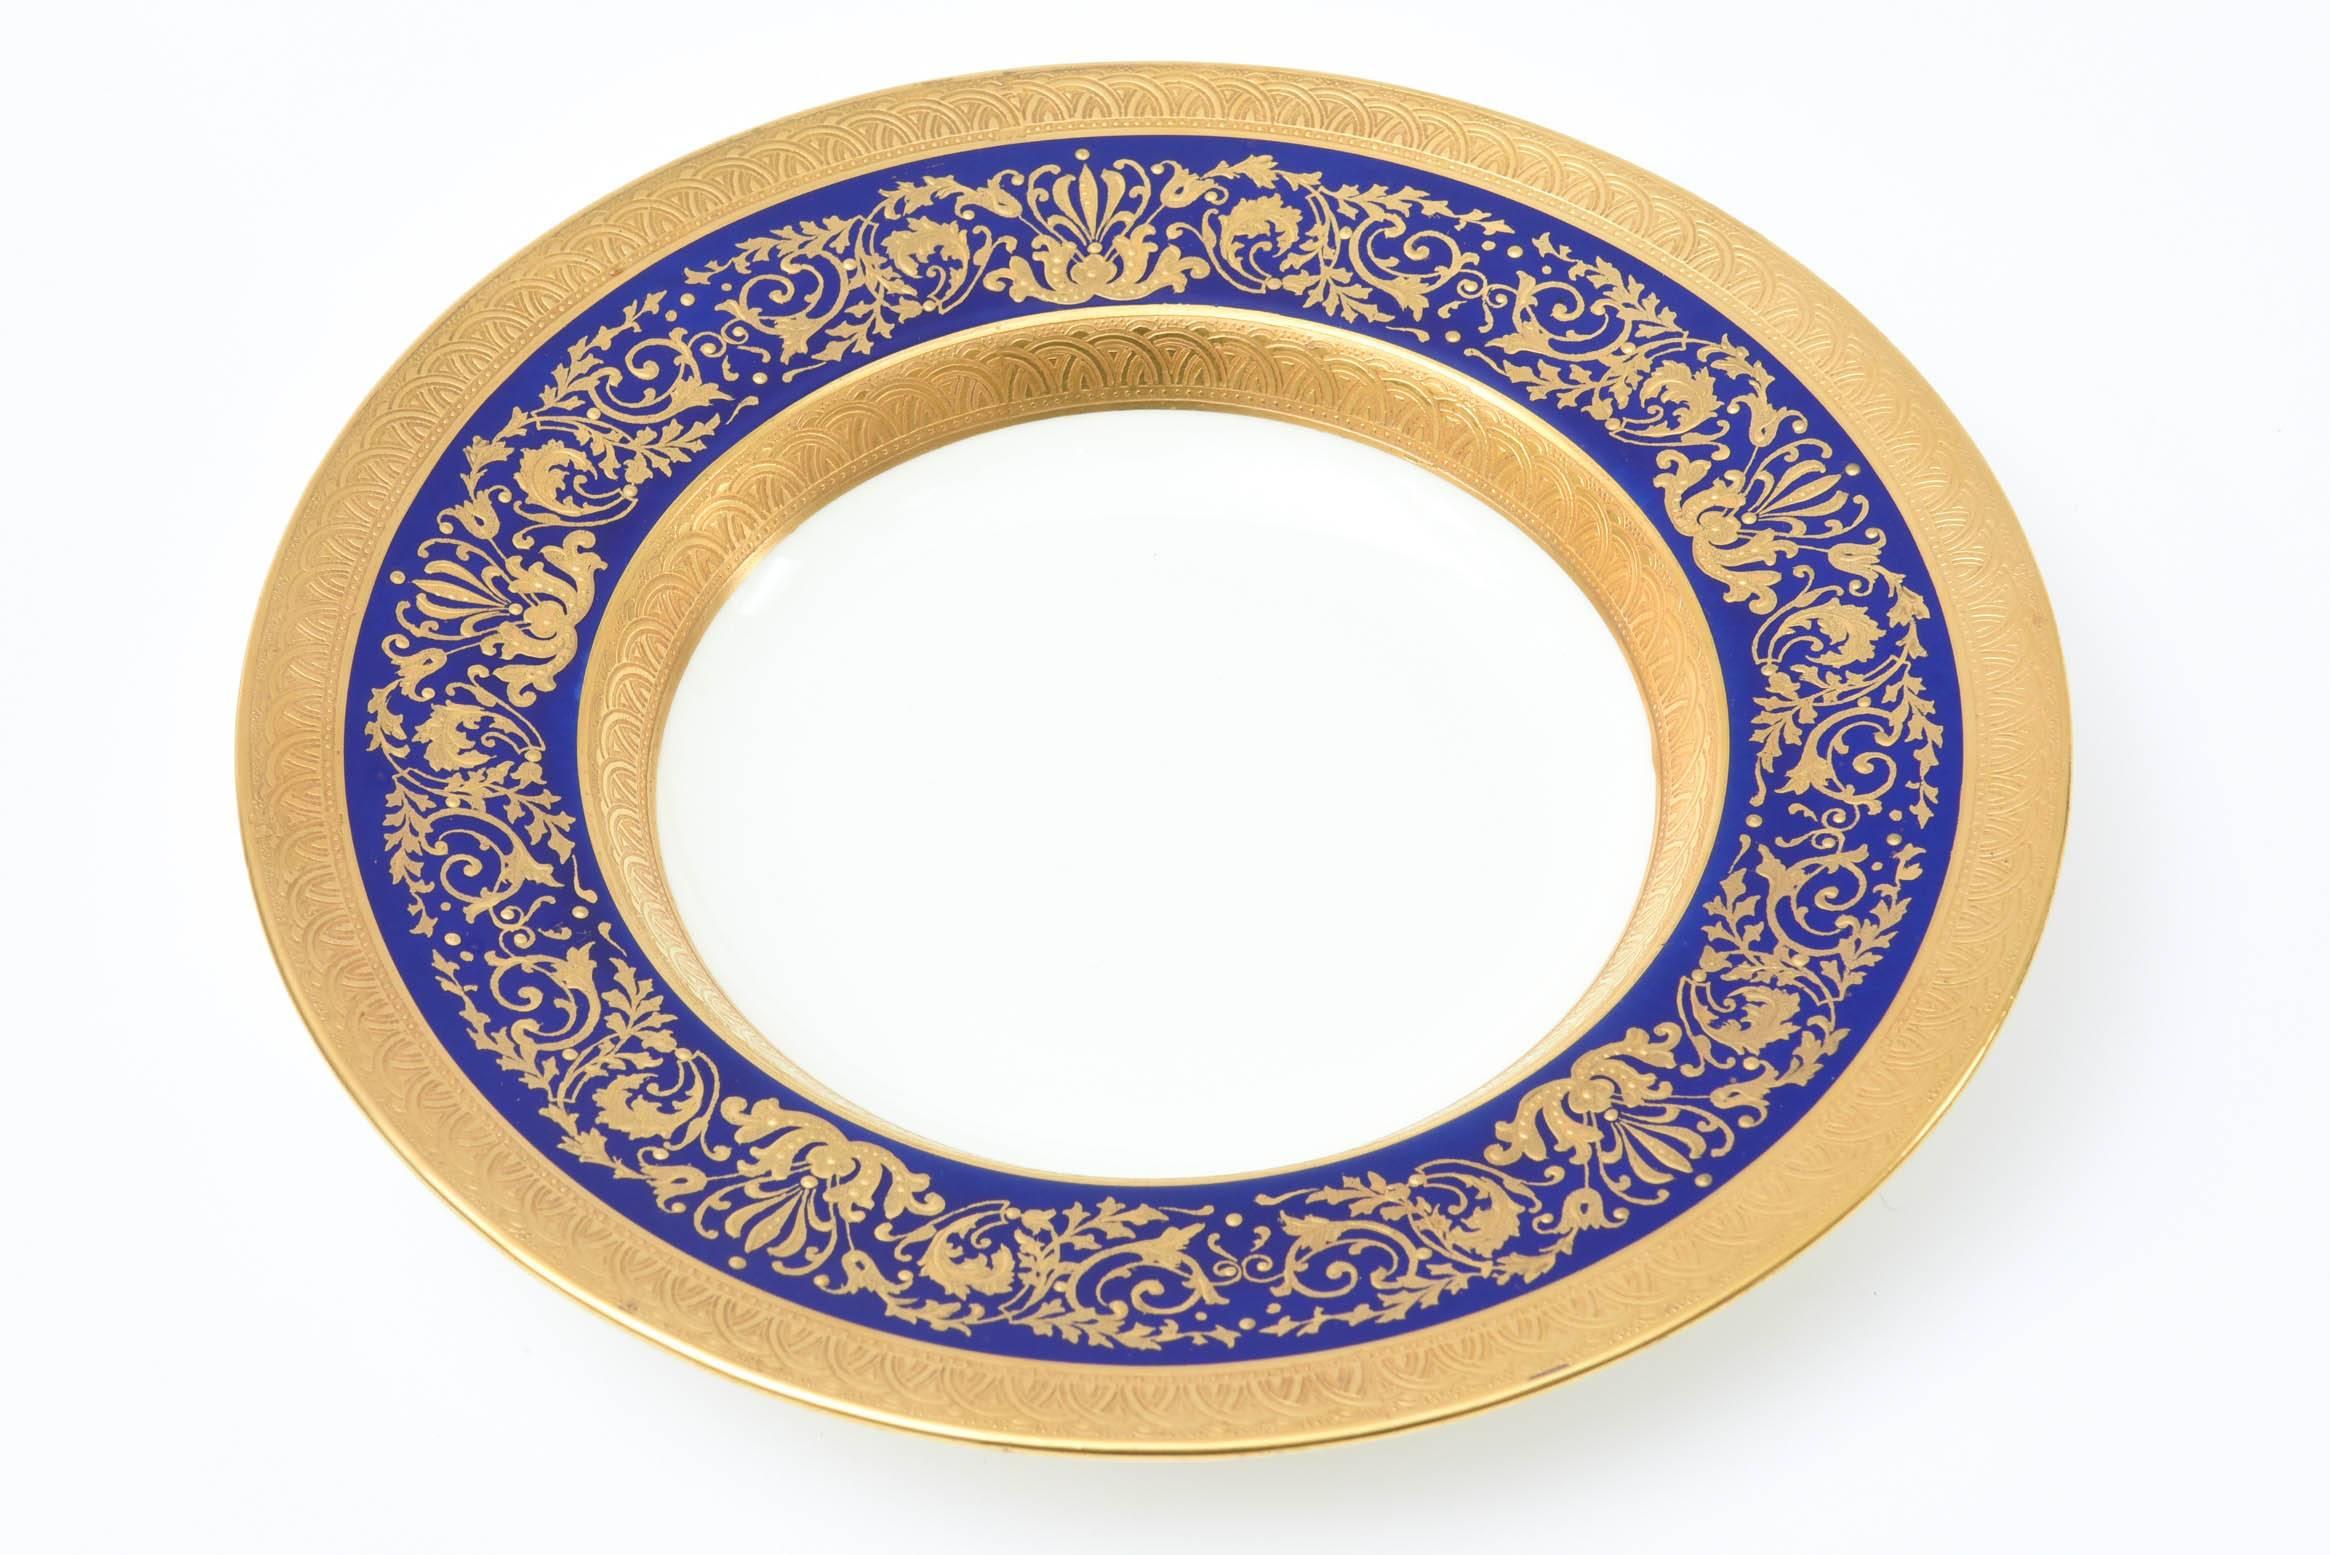 Hand-Crafted 12 Tiffany Cobalt Blue and Heavy Gilt Encrusted Rimmed Soup Bowls, Antique